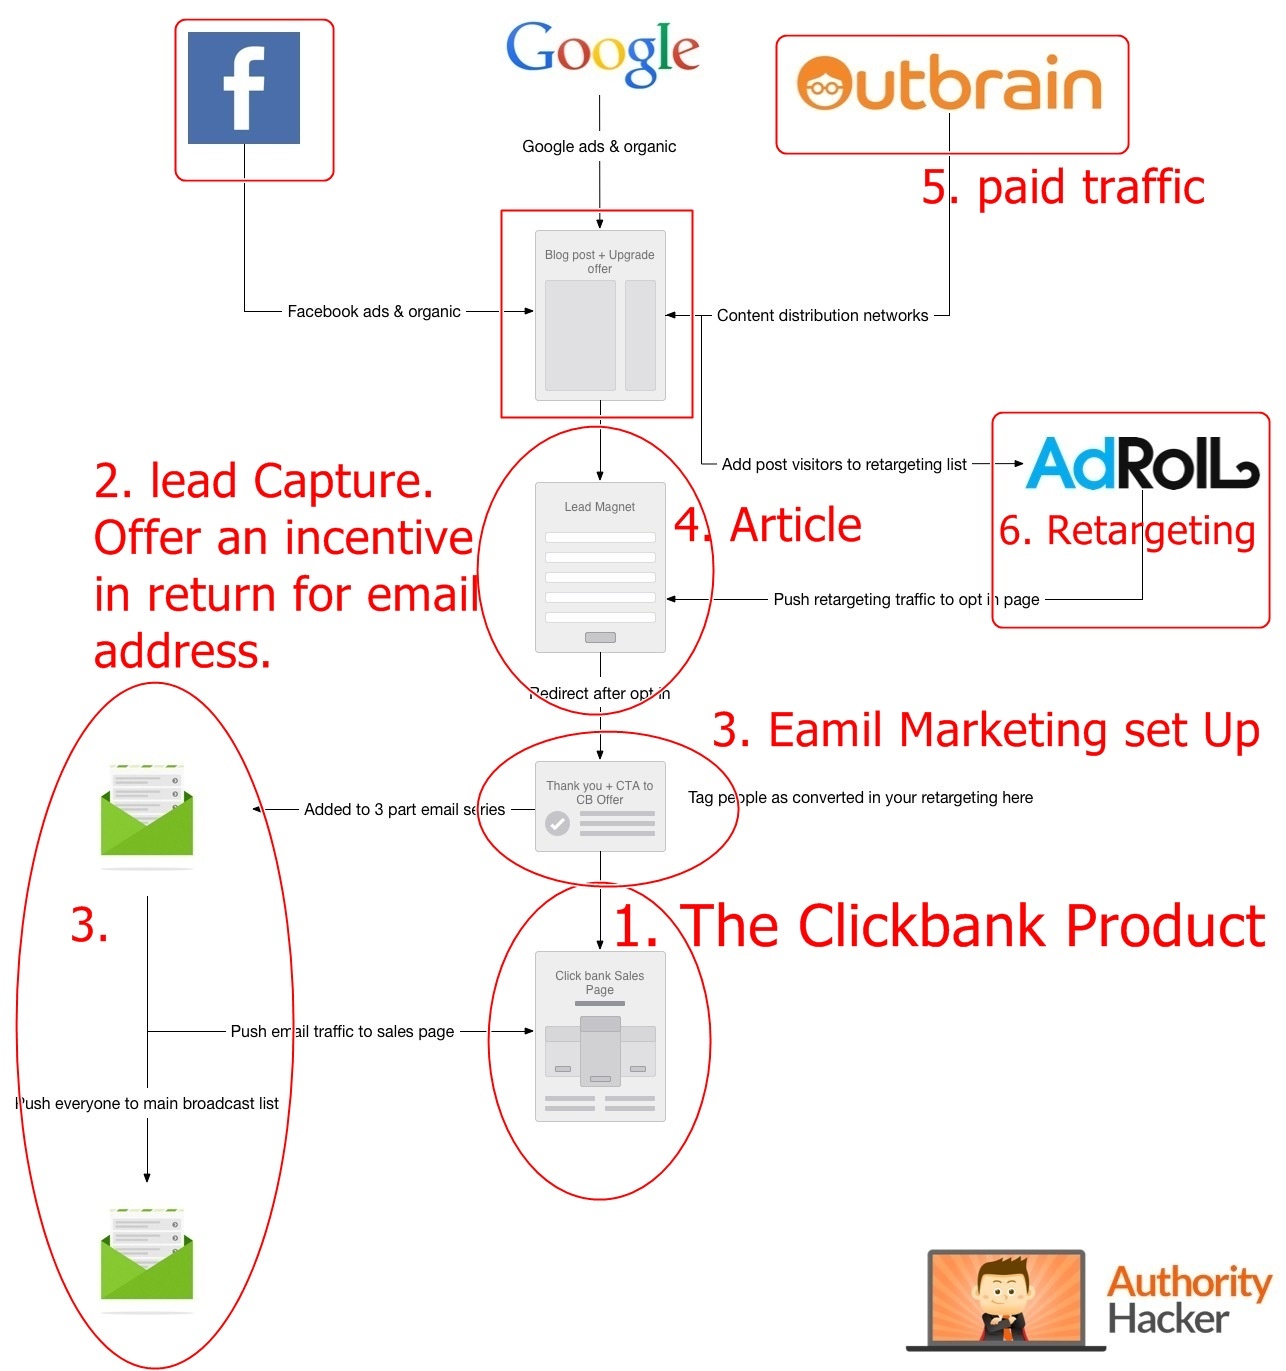 Authority Hacker - How To Make Money On Clickbank